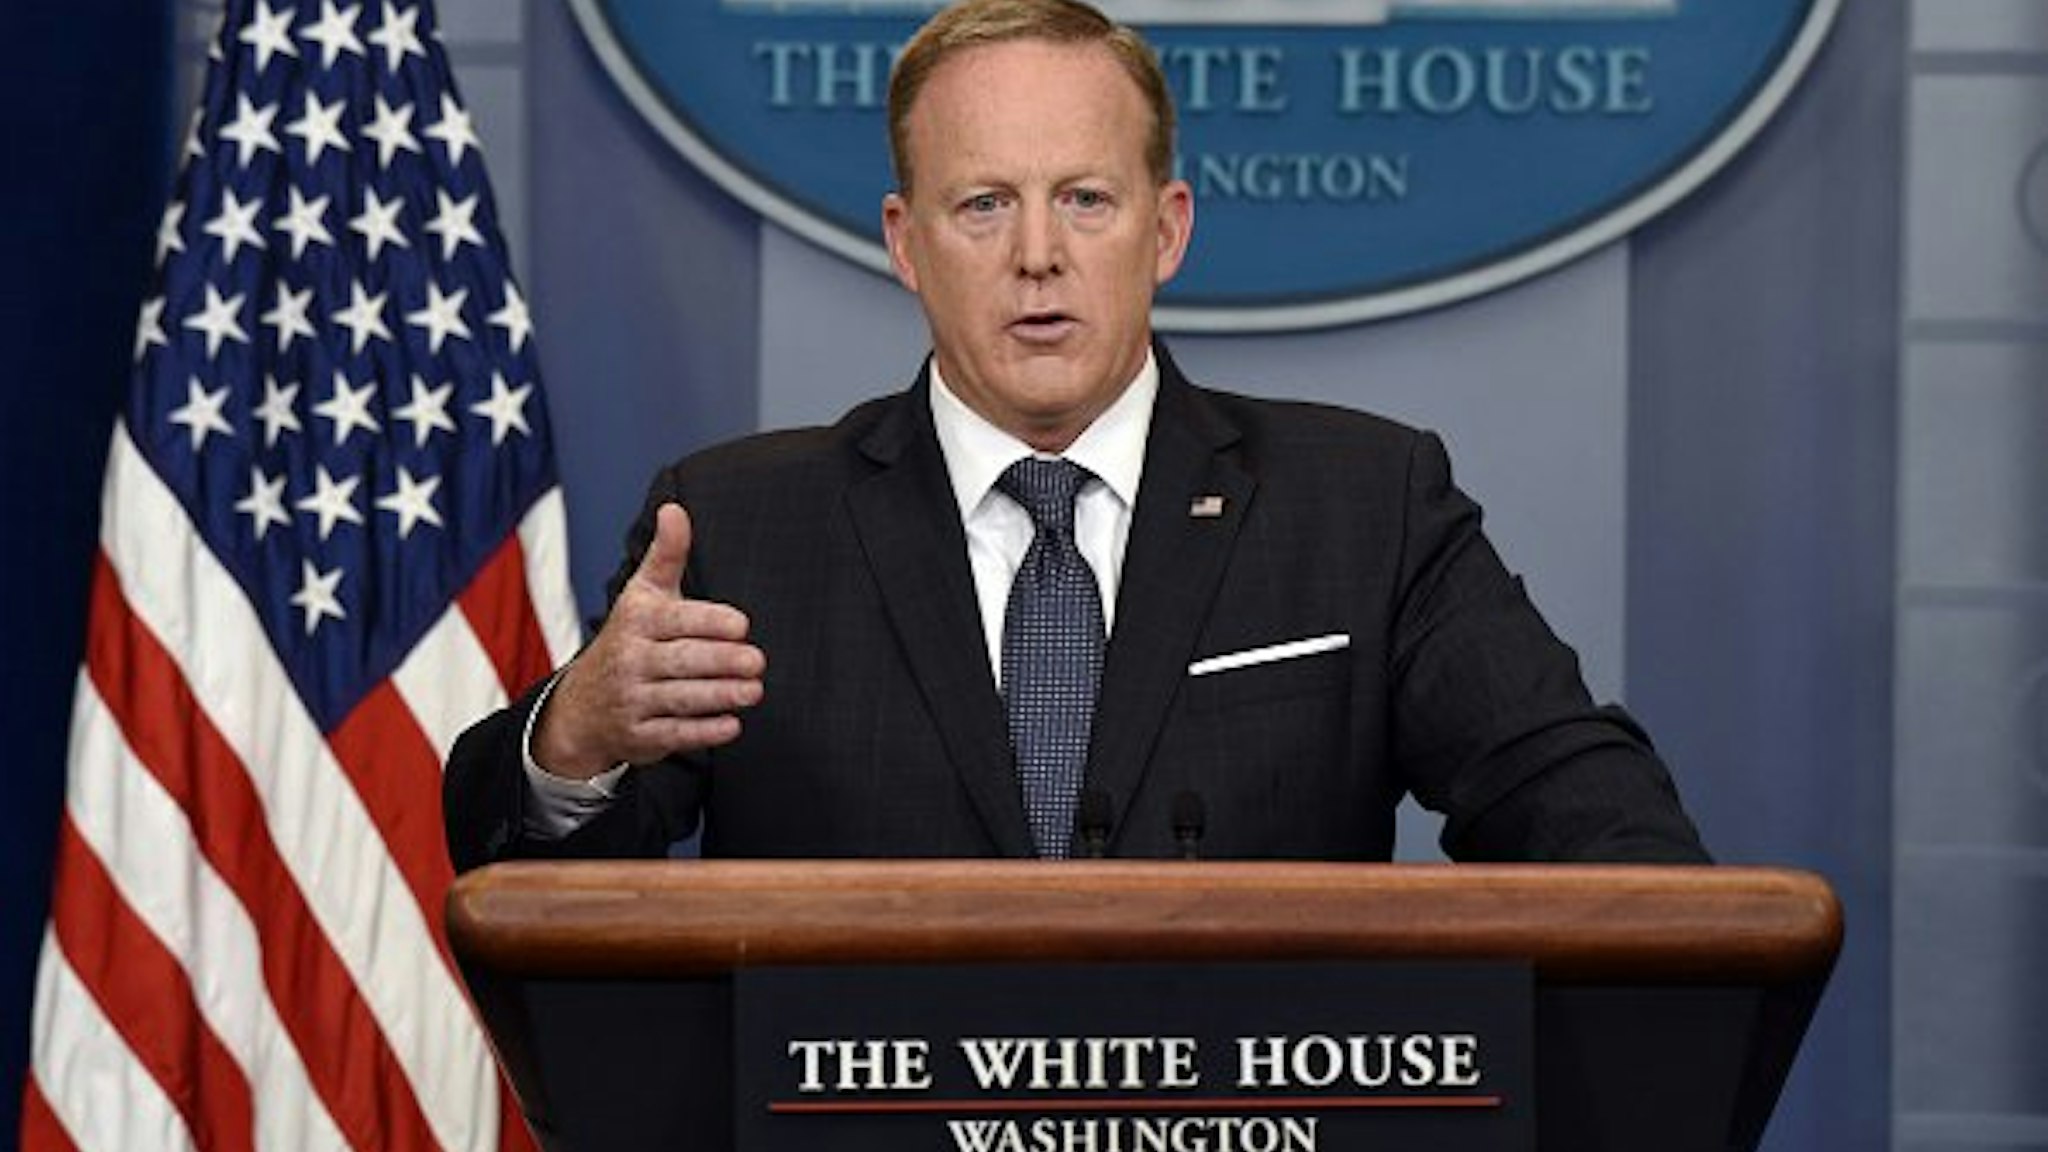 Sean Spicer, White House press secretary, speaks during a White House press briefing in Washington, D.C., U.S., on Tuesday, May 30, 2017.